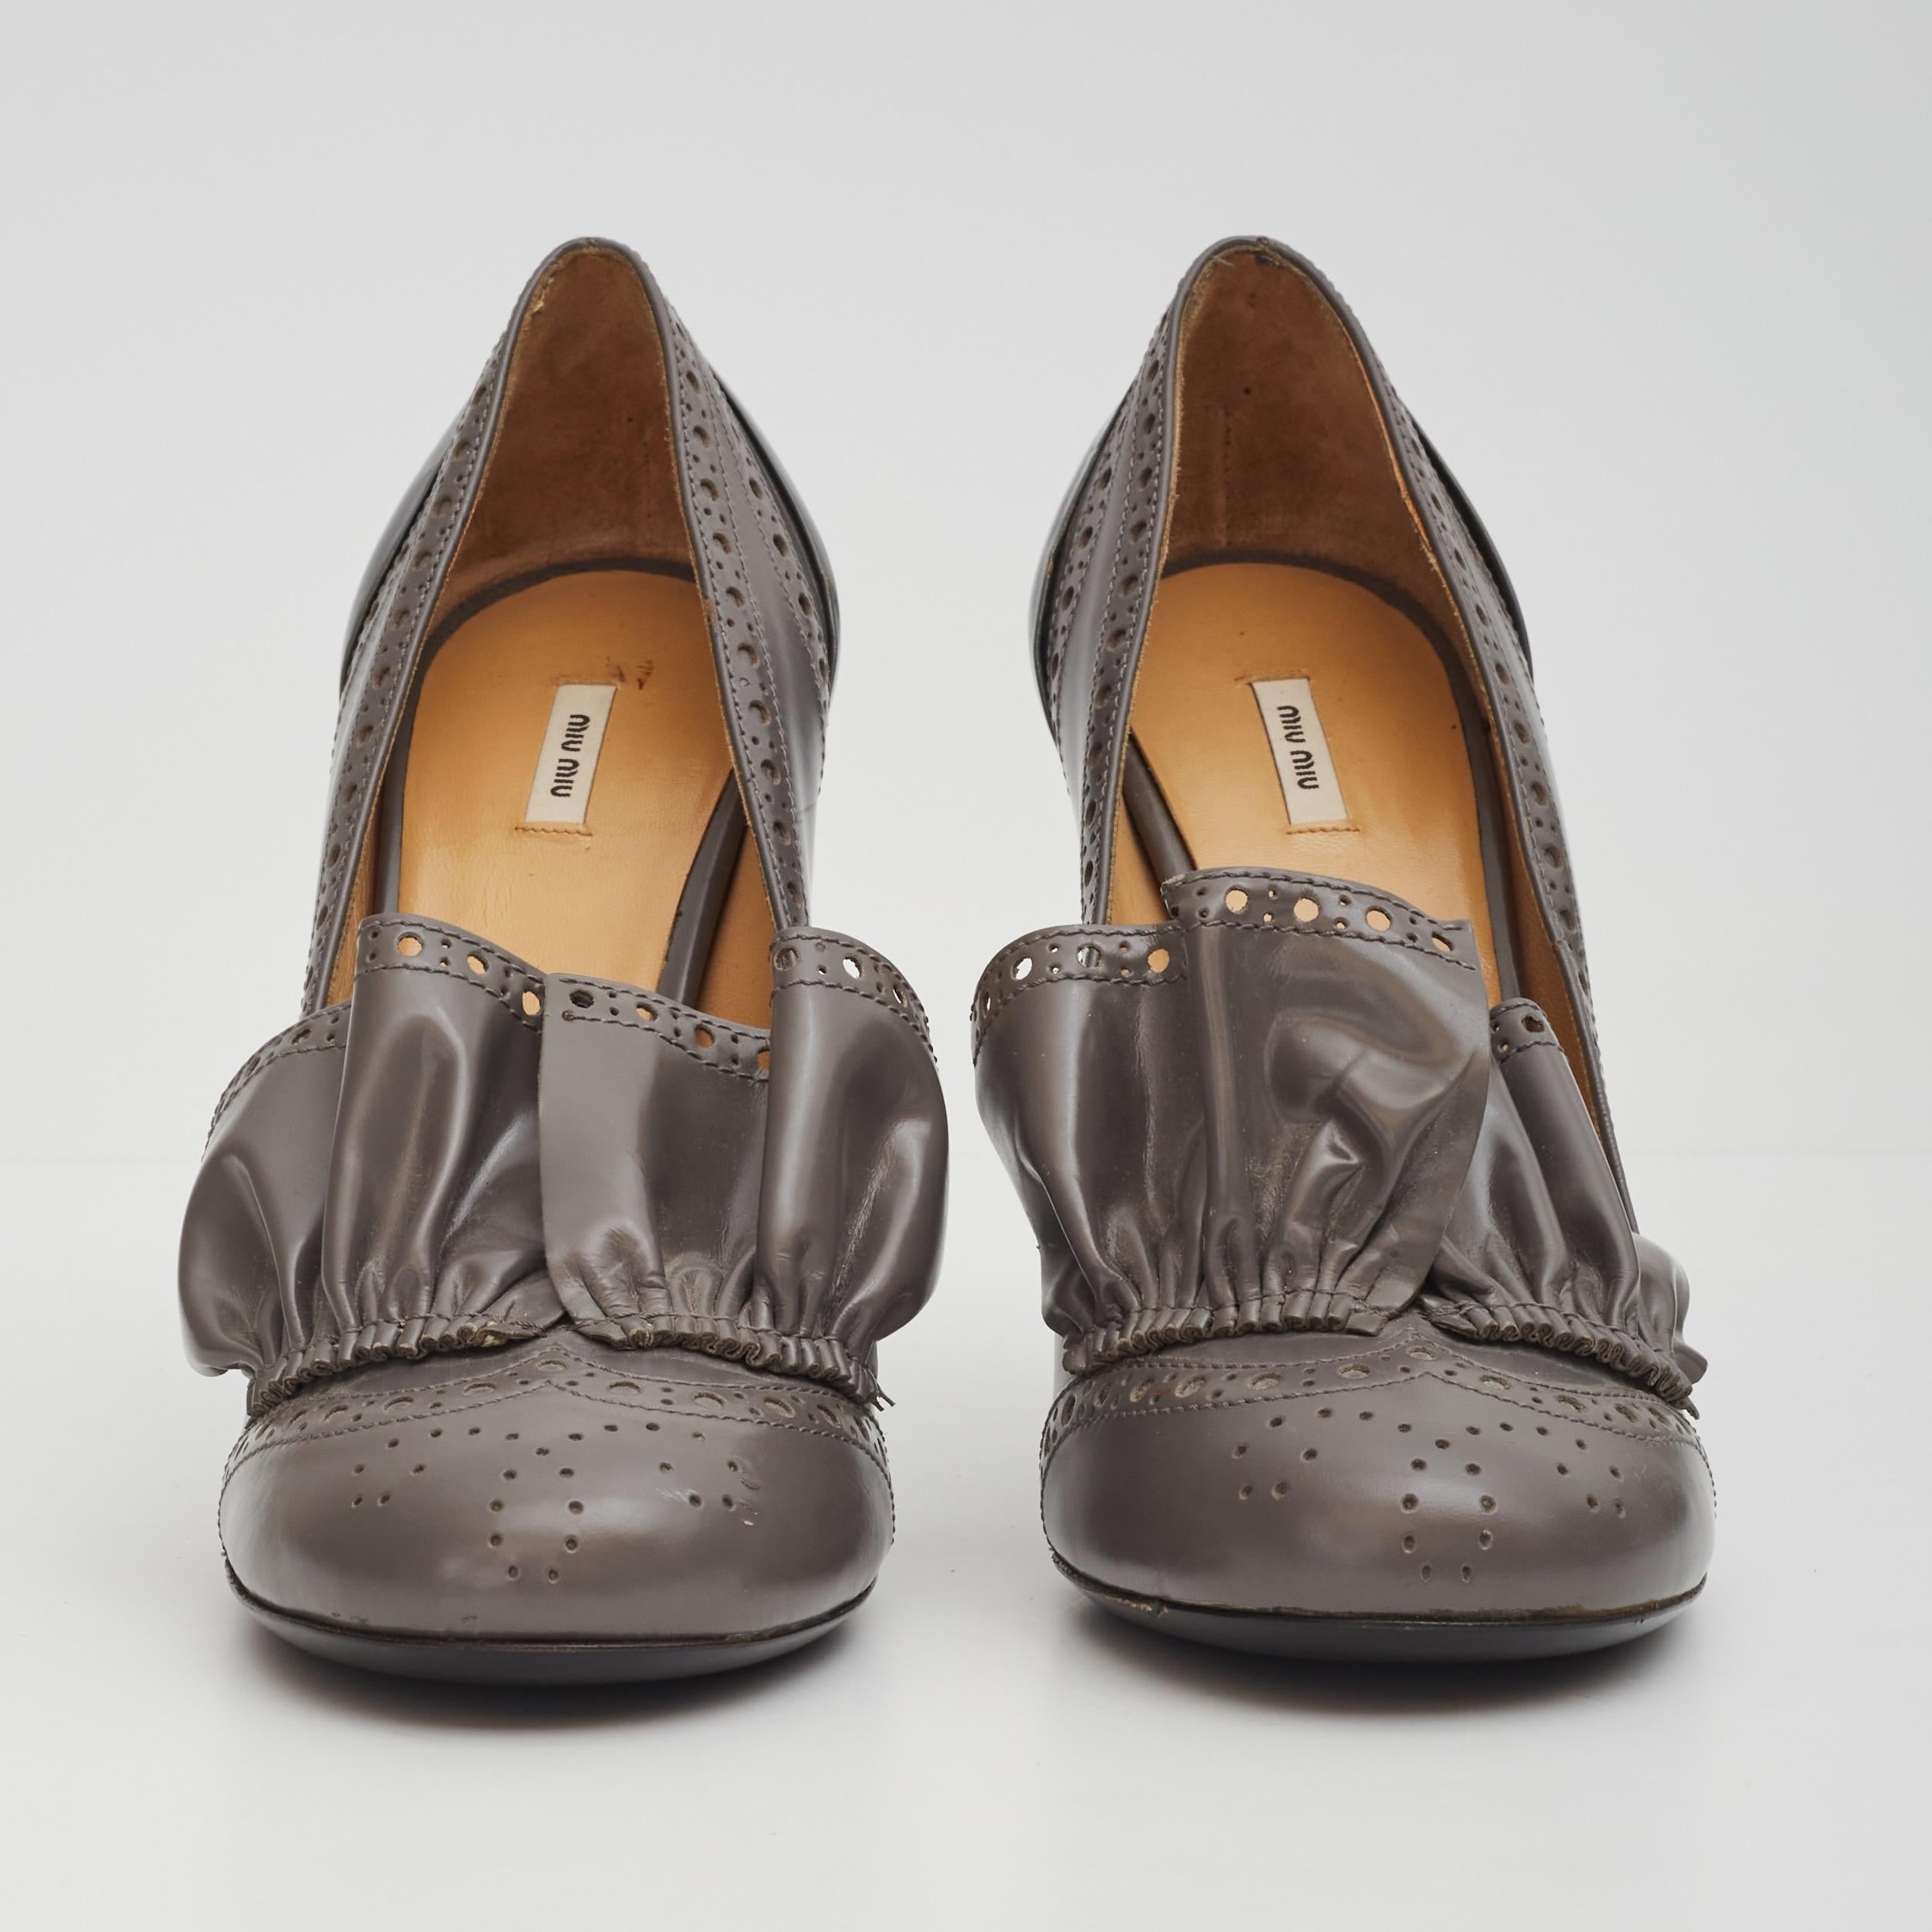 Color: Grey
Material: Leather
Size: 37 EU / 6 US
Heel Height: 100 mm / 4”
Condition: Very good. Light marks and scuffs to outsoles. Minimal signs of use to leather uppers.
Comes With: Dust Bag And Box 

Made in Italy